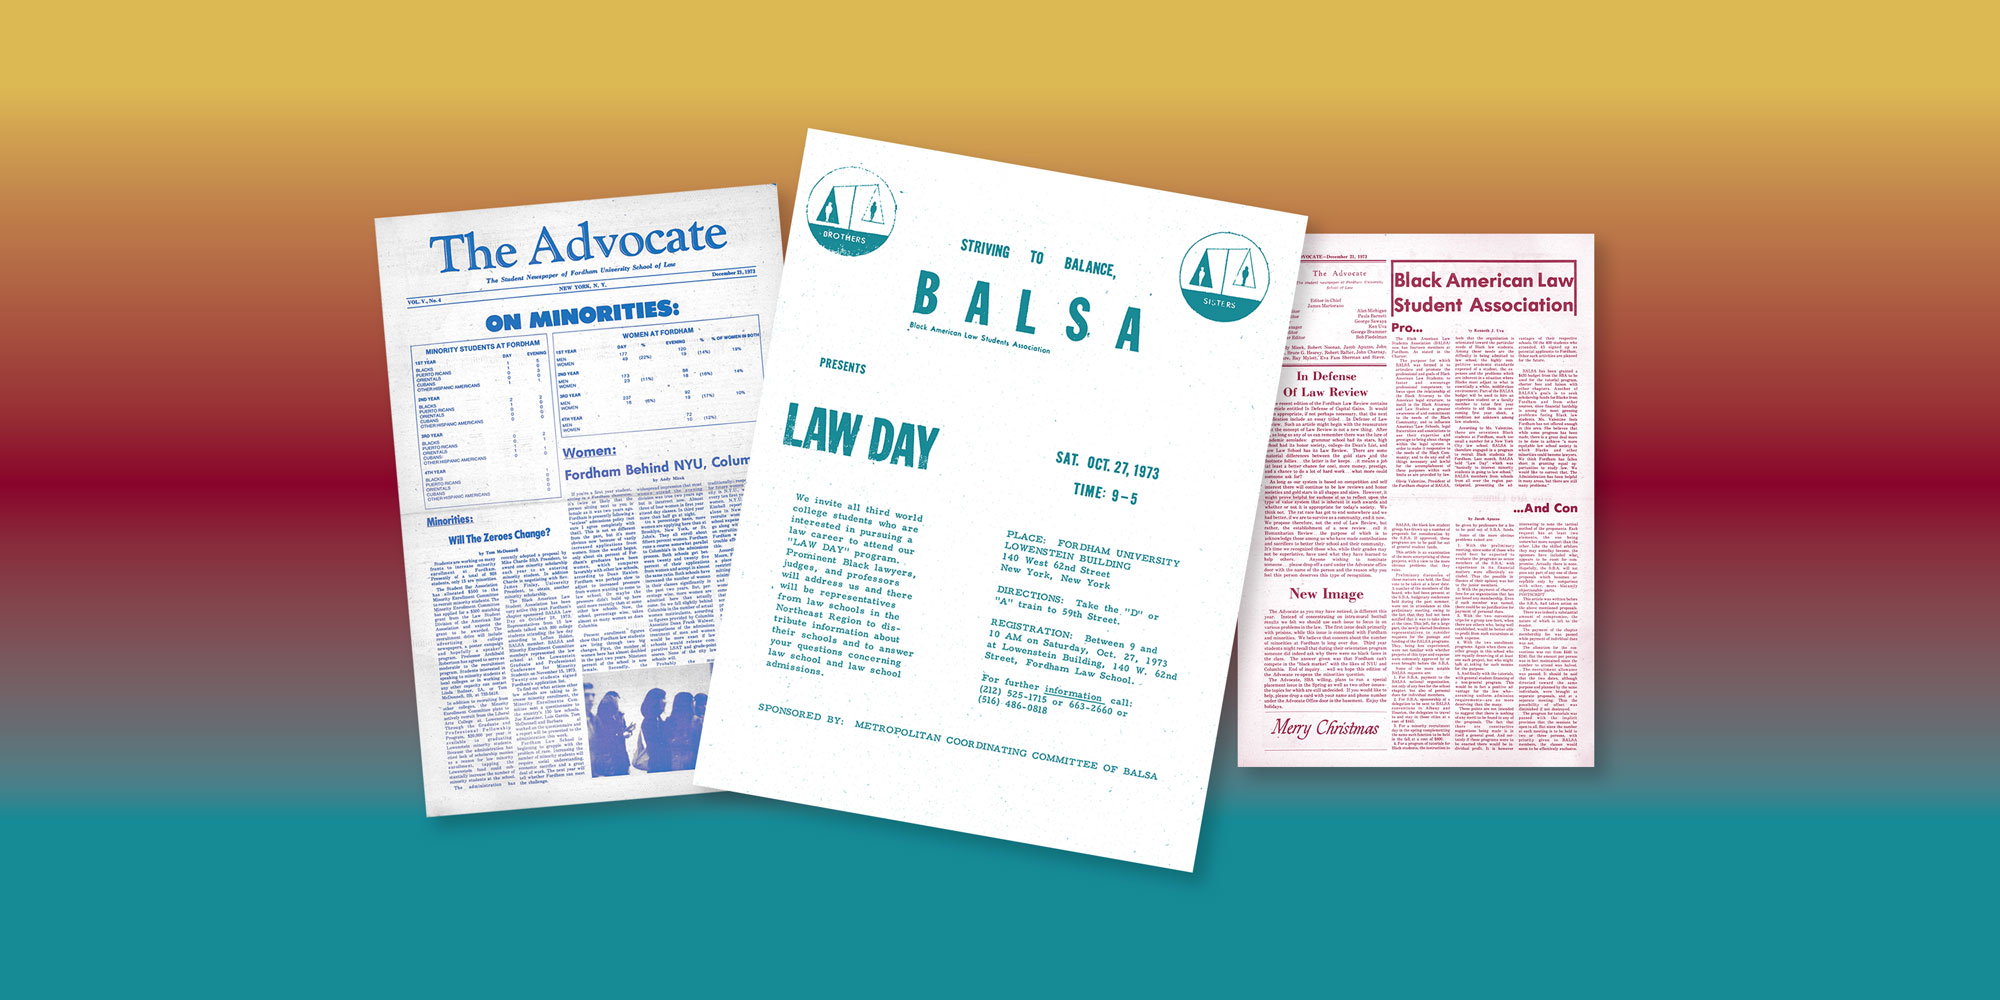 Pages of The Advocate from the early 70's talking about BALSA and related articles